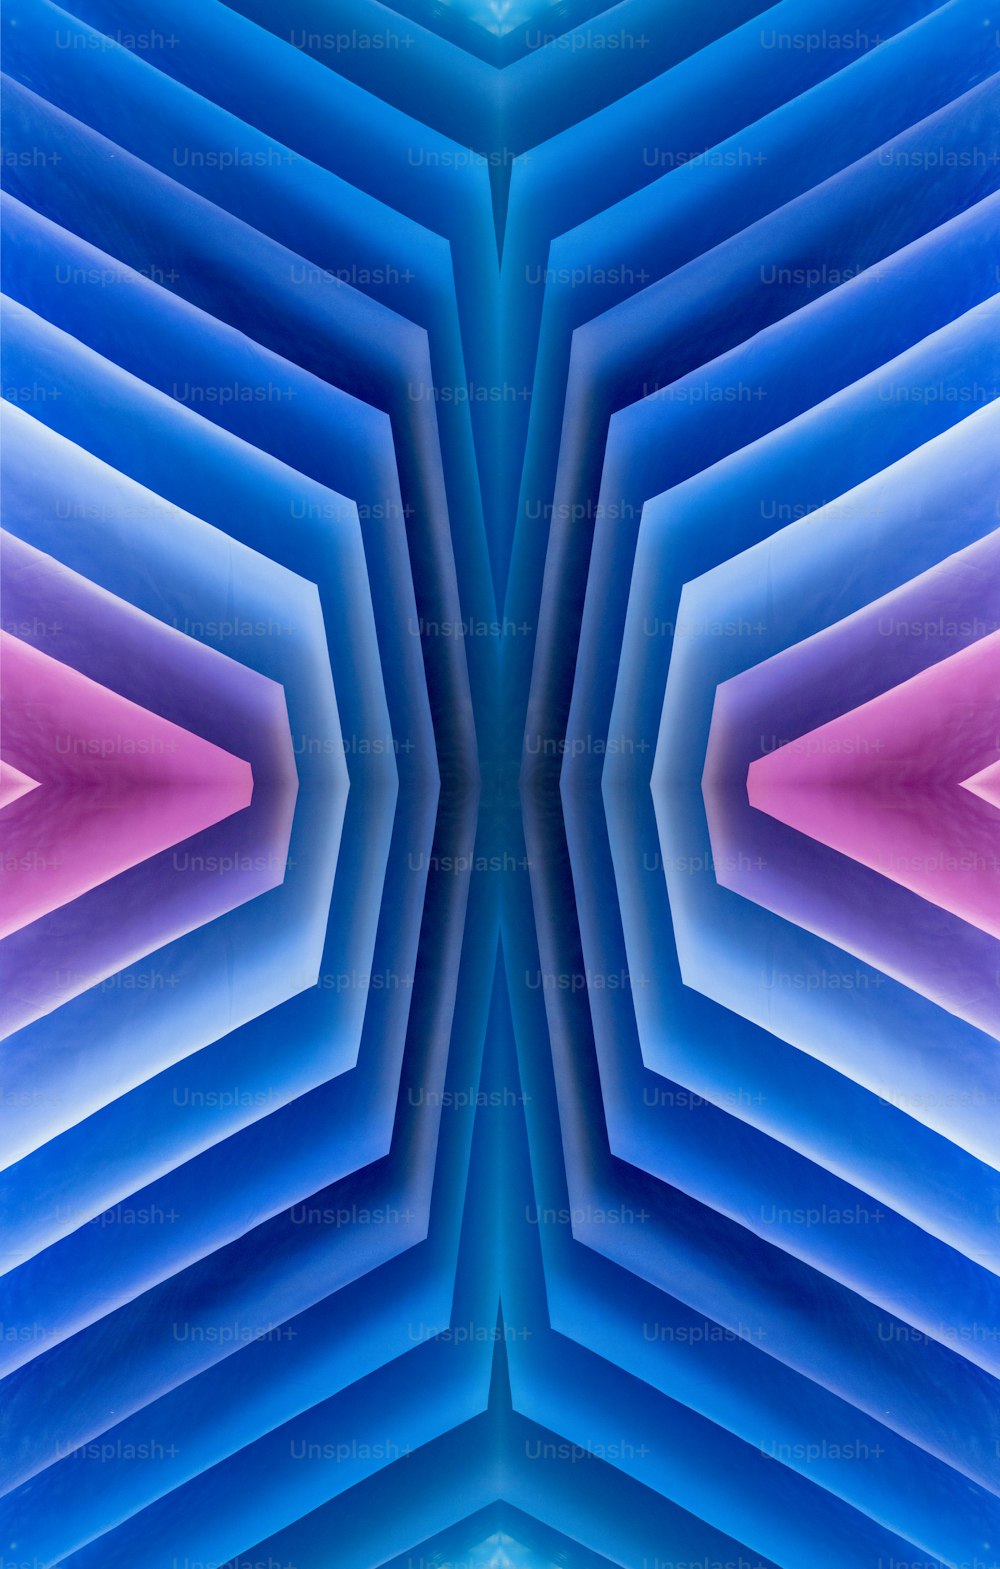 an abstract image of a blue and pink structure